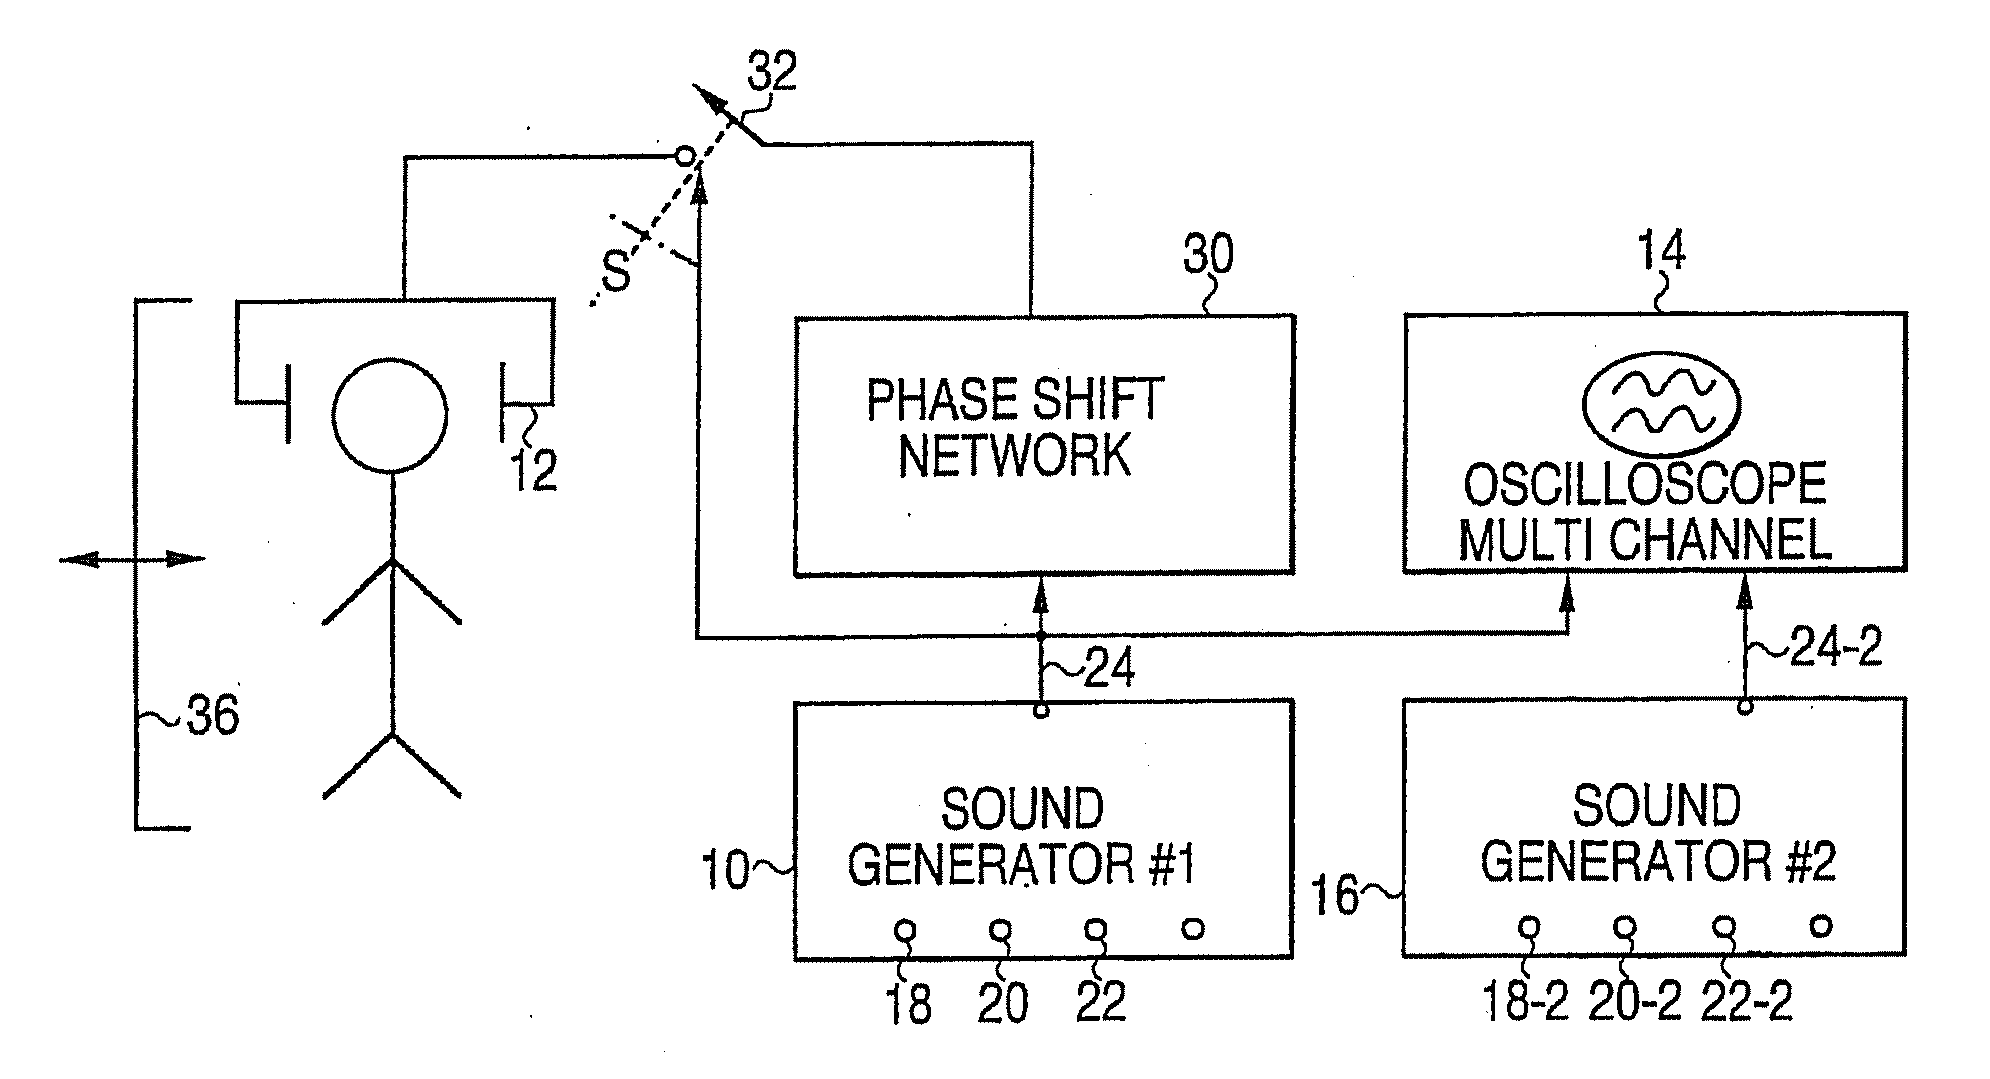 Method and Apparatus for Treatment of Monofrequency Tinnitus Utilizing Sound Wave Cancellation Techniques